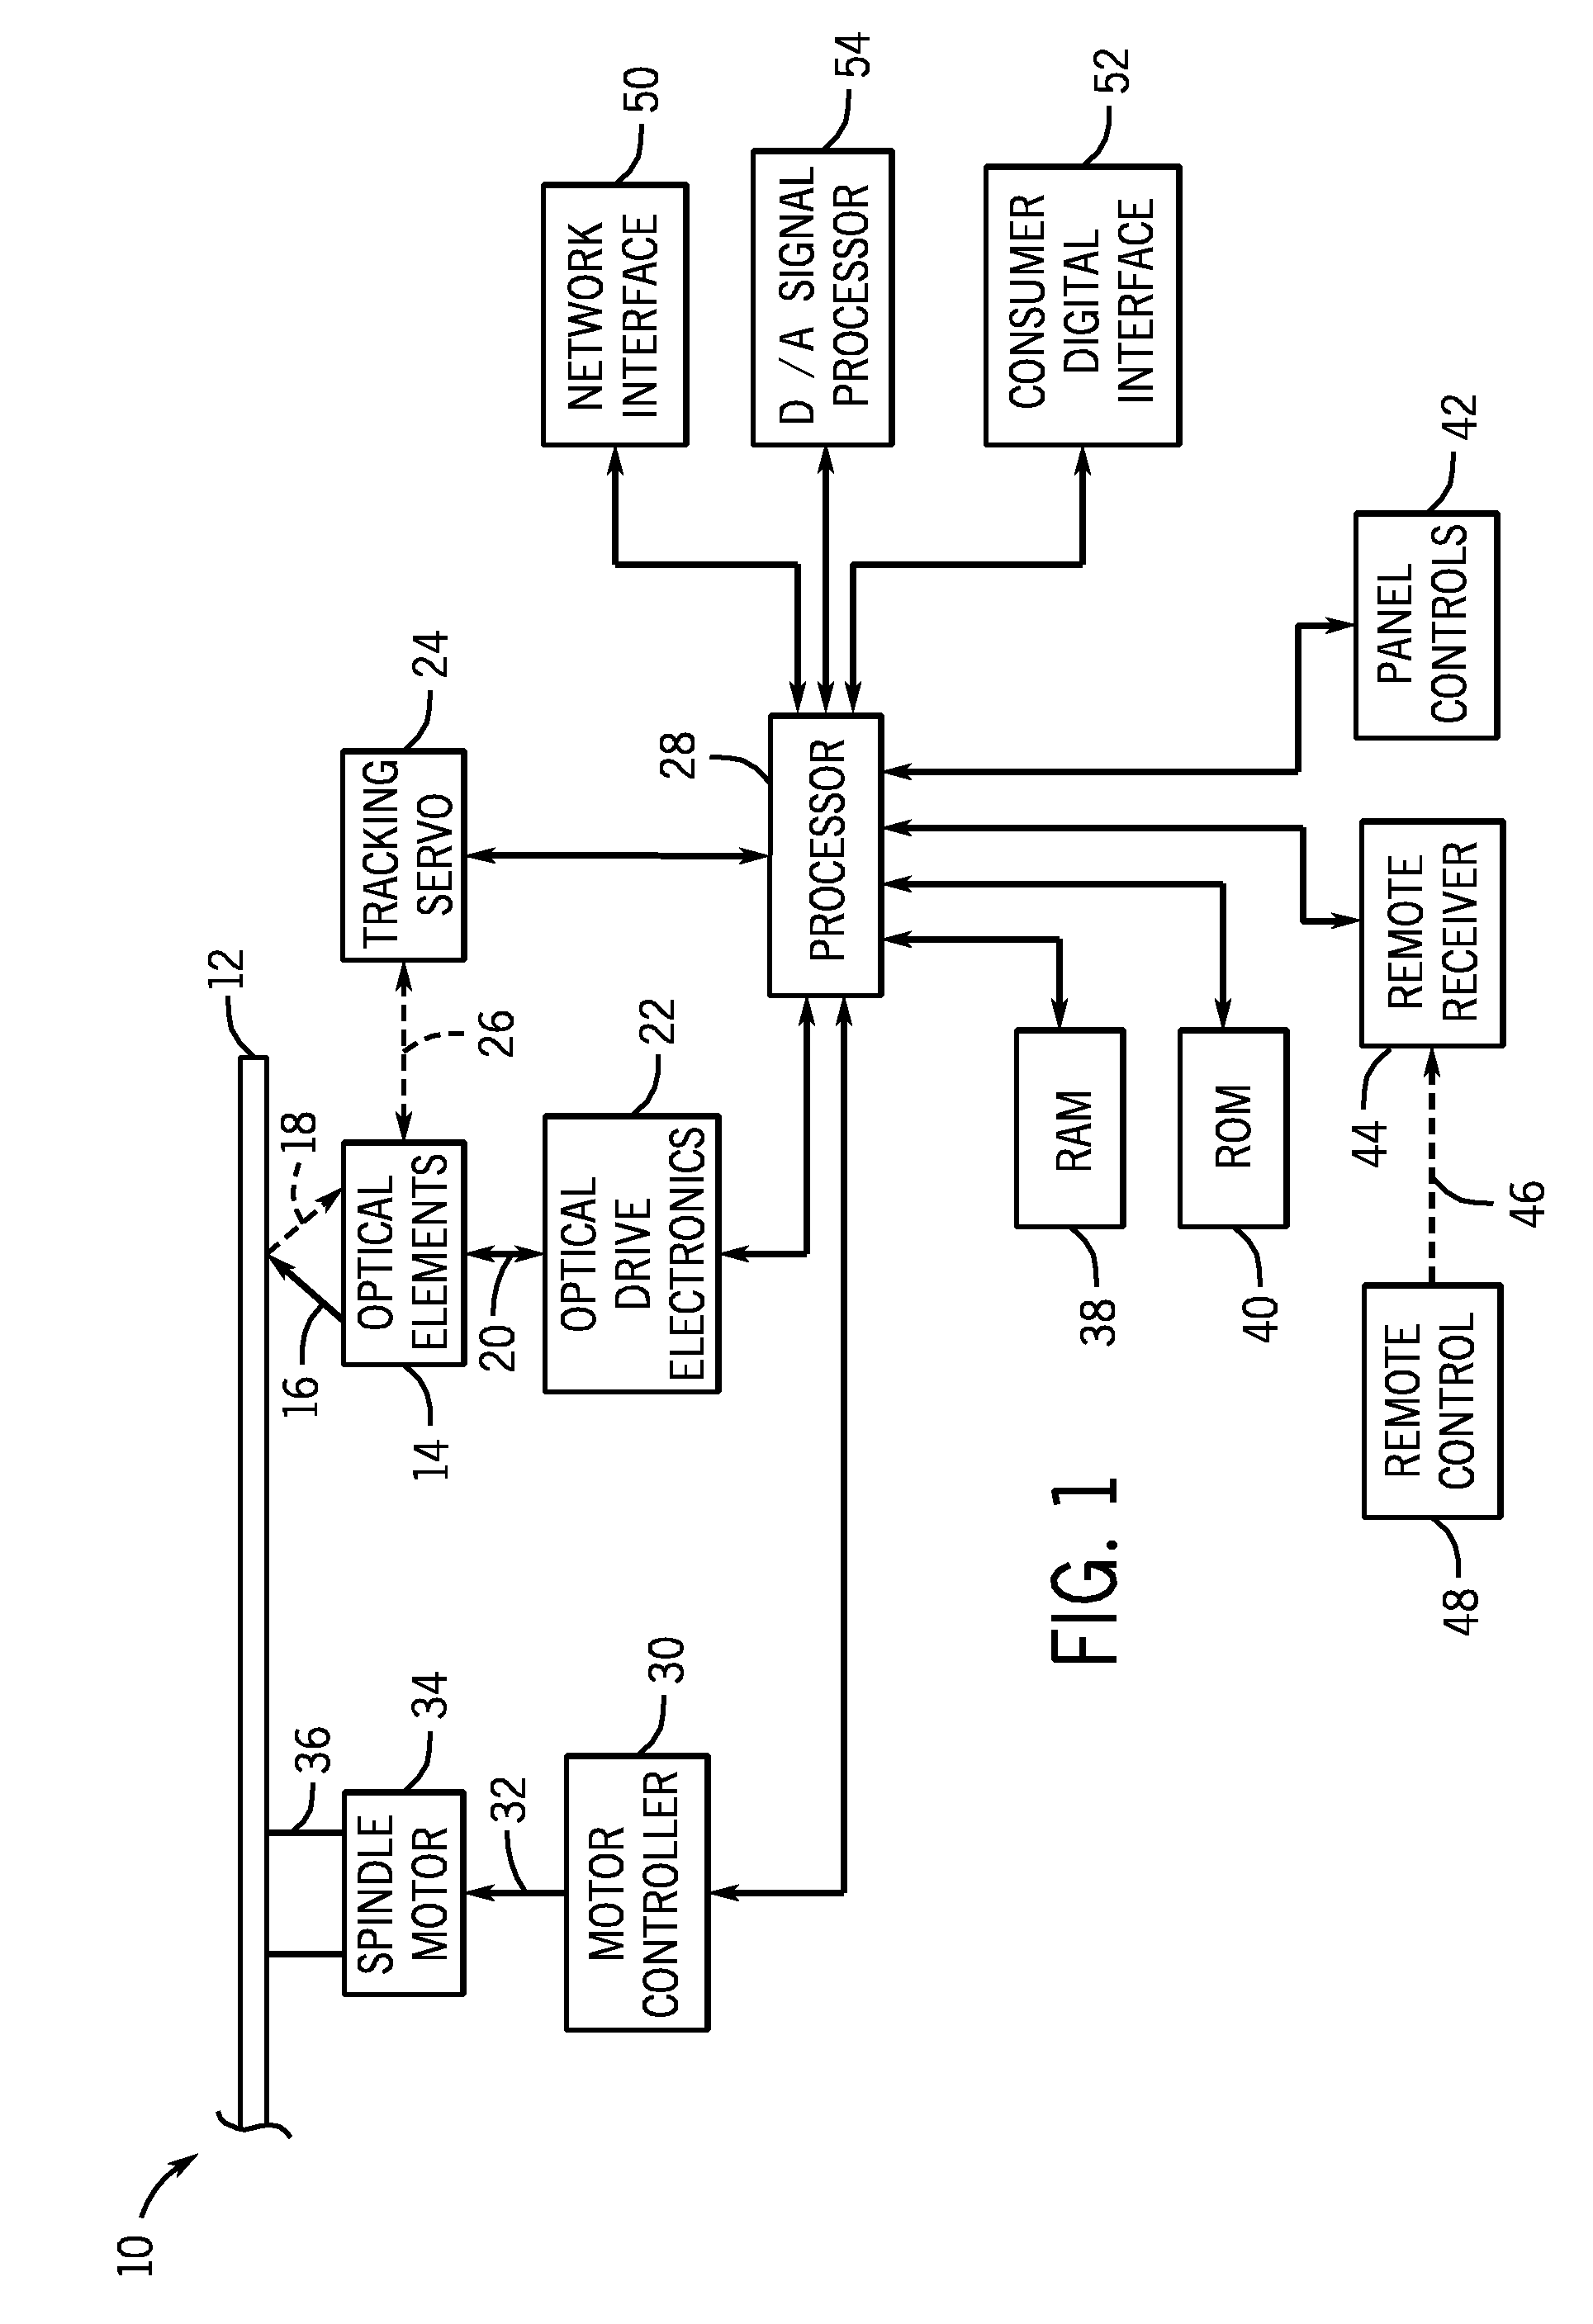 Method and system for bit prediction using a multi-pixel detector